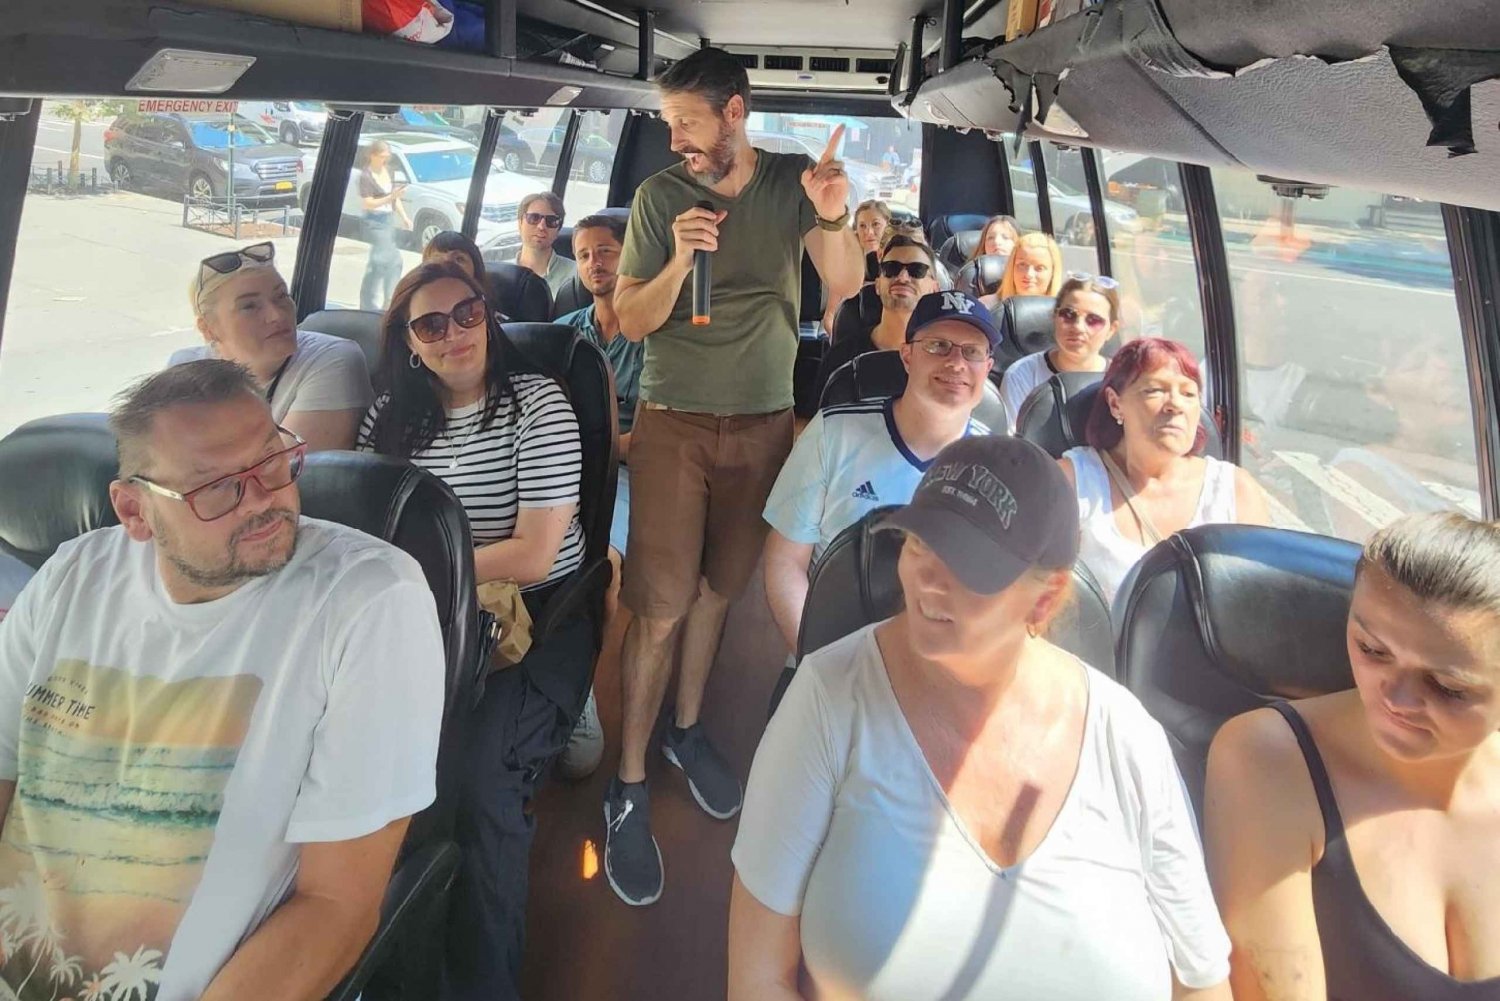 The Comedy Bus Tour of NYC